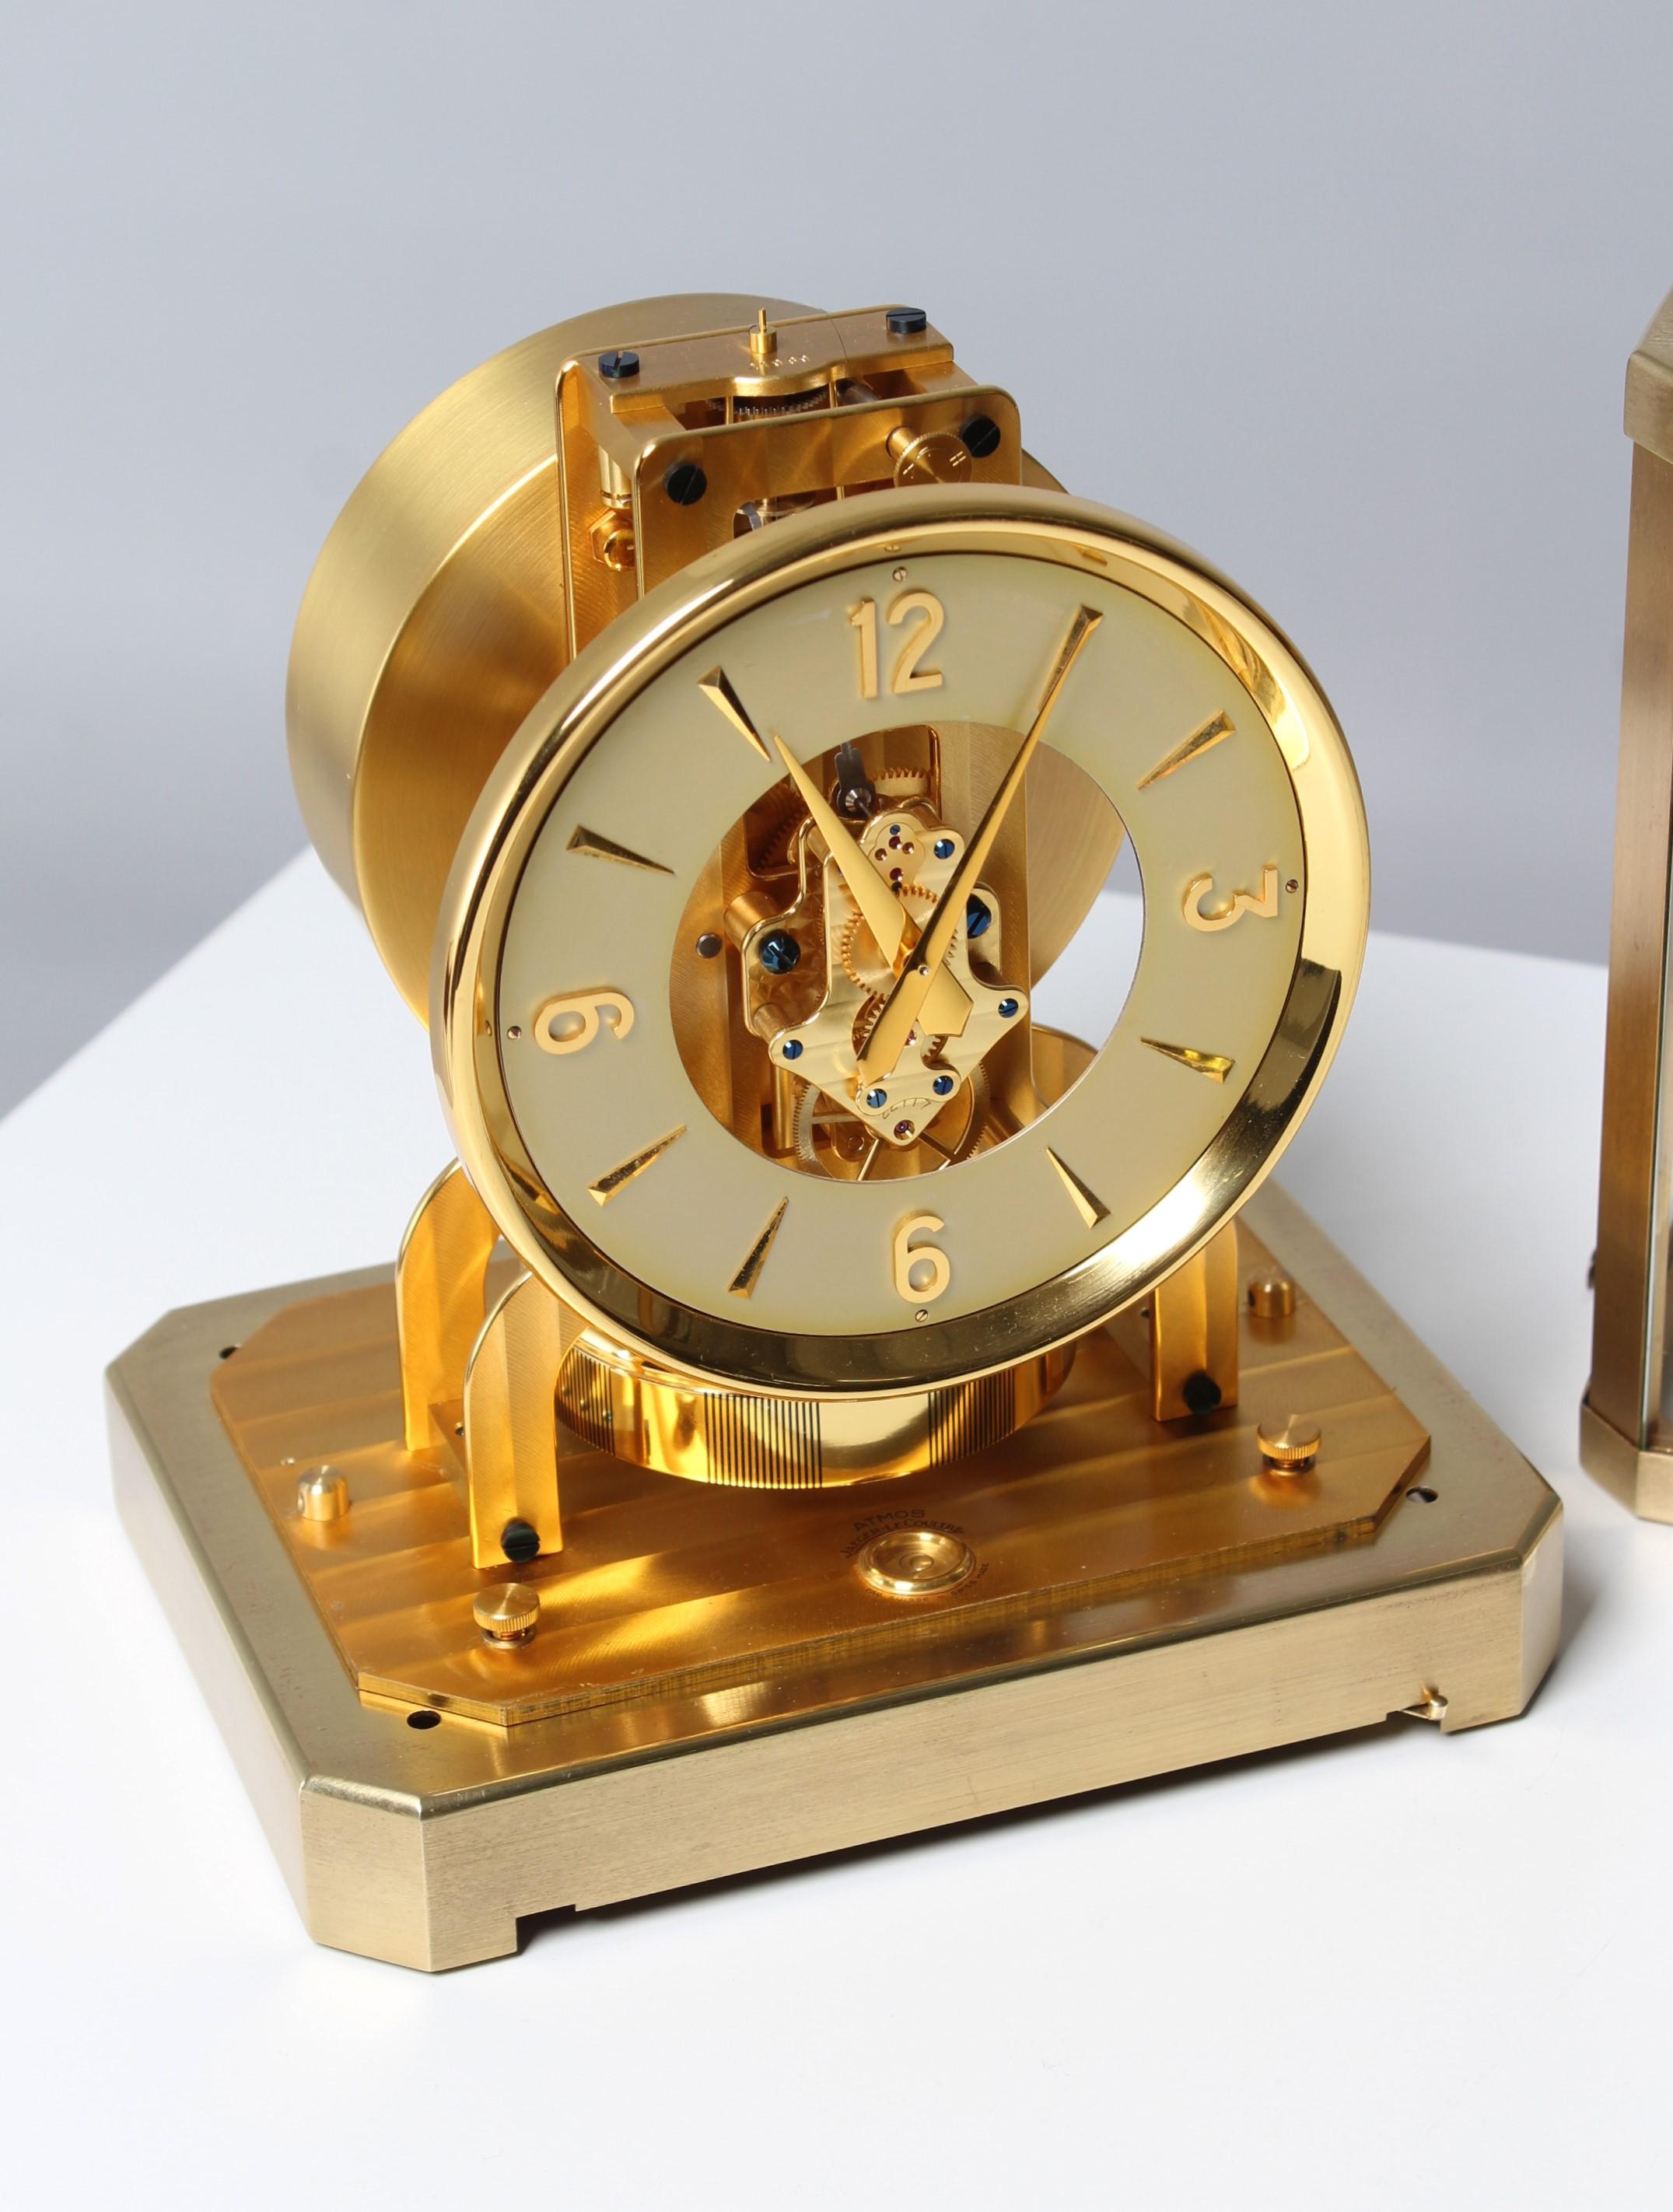 Swiss Atmos Clock by Jaeger LeCoultre, Classique Design, Manufactured in 1950 For Sale